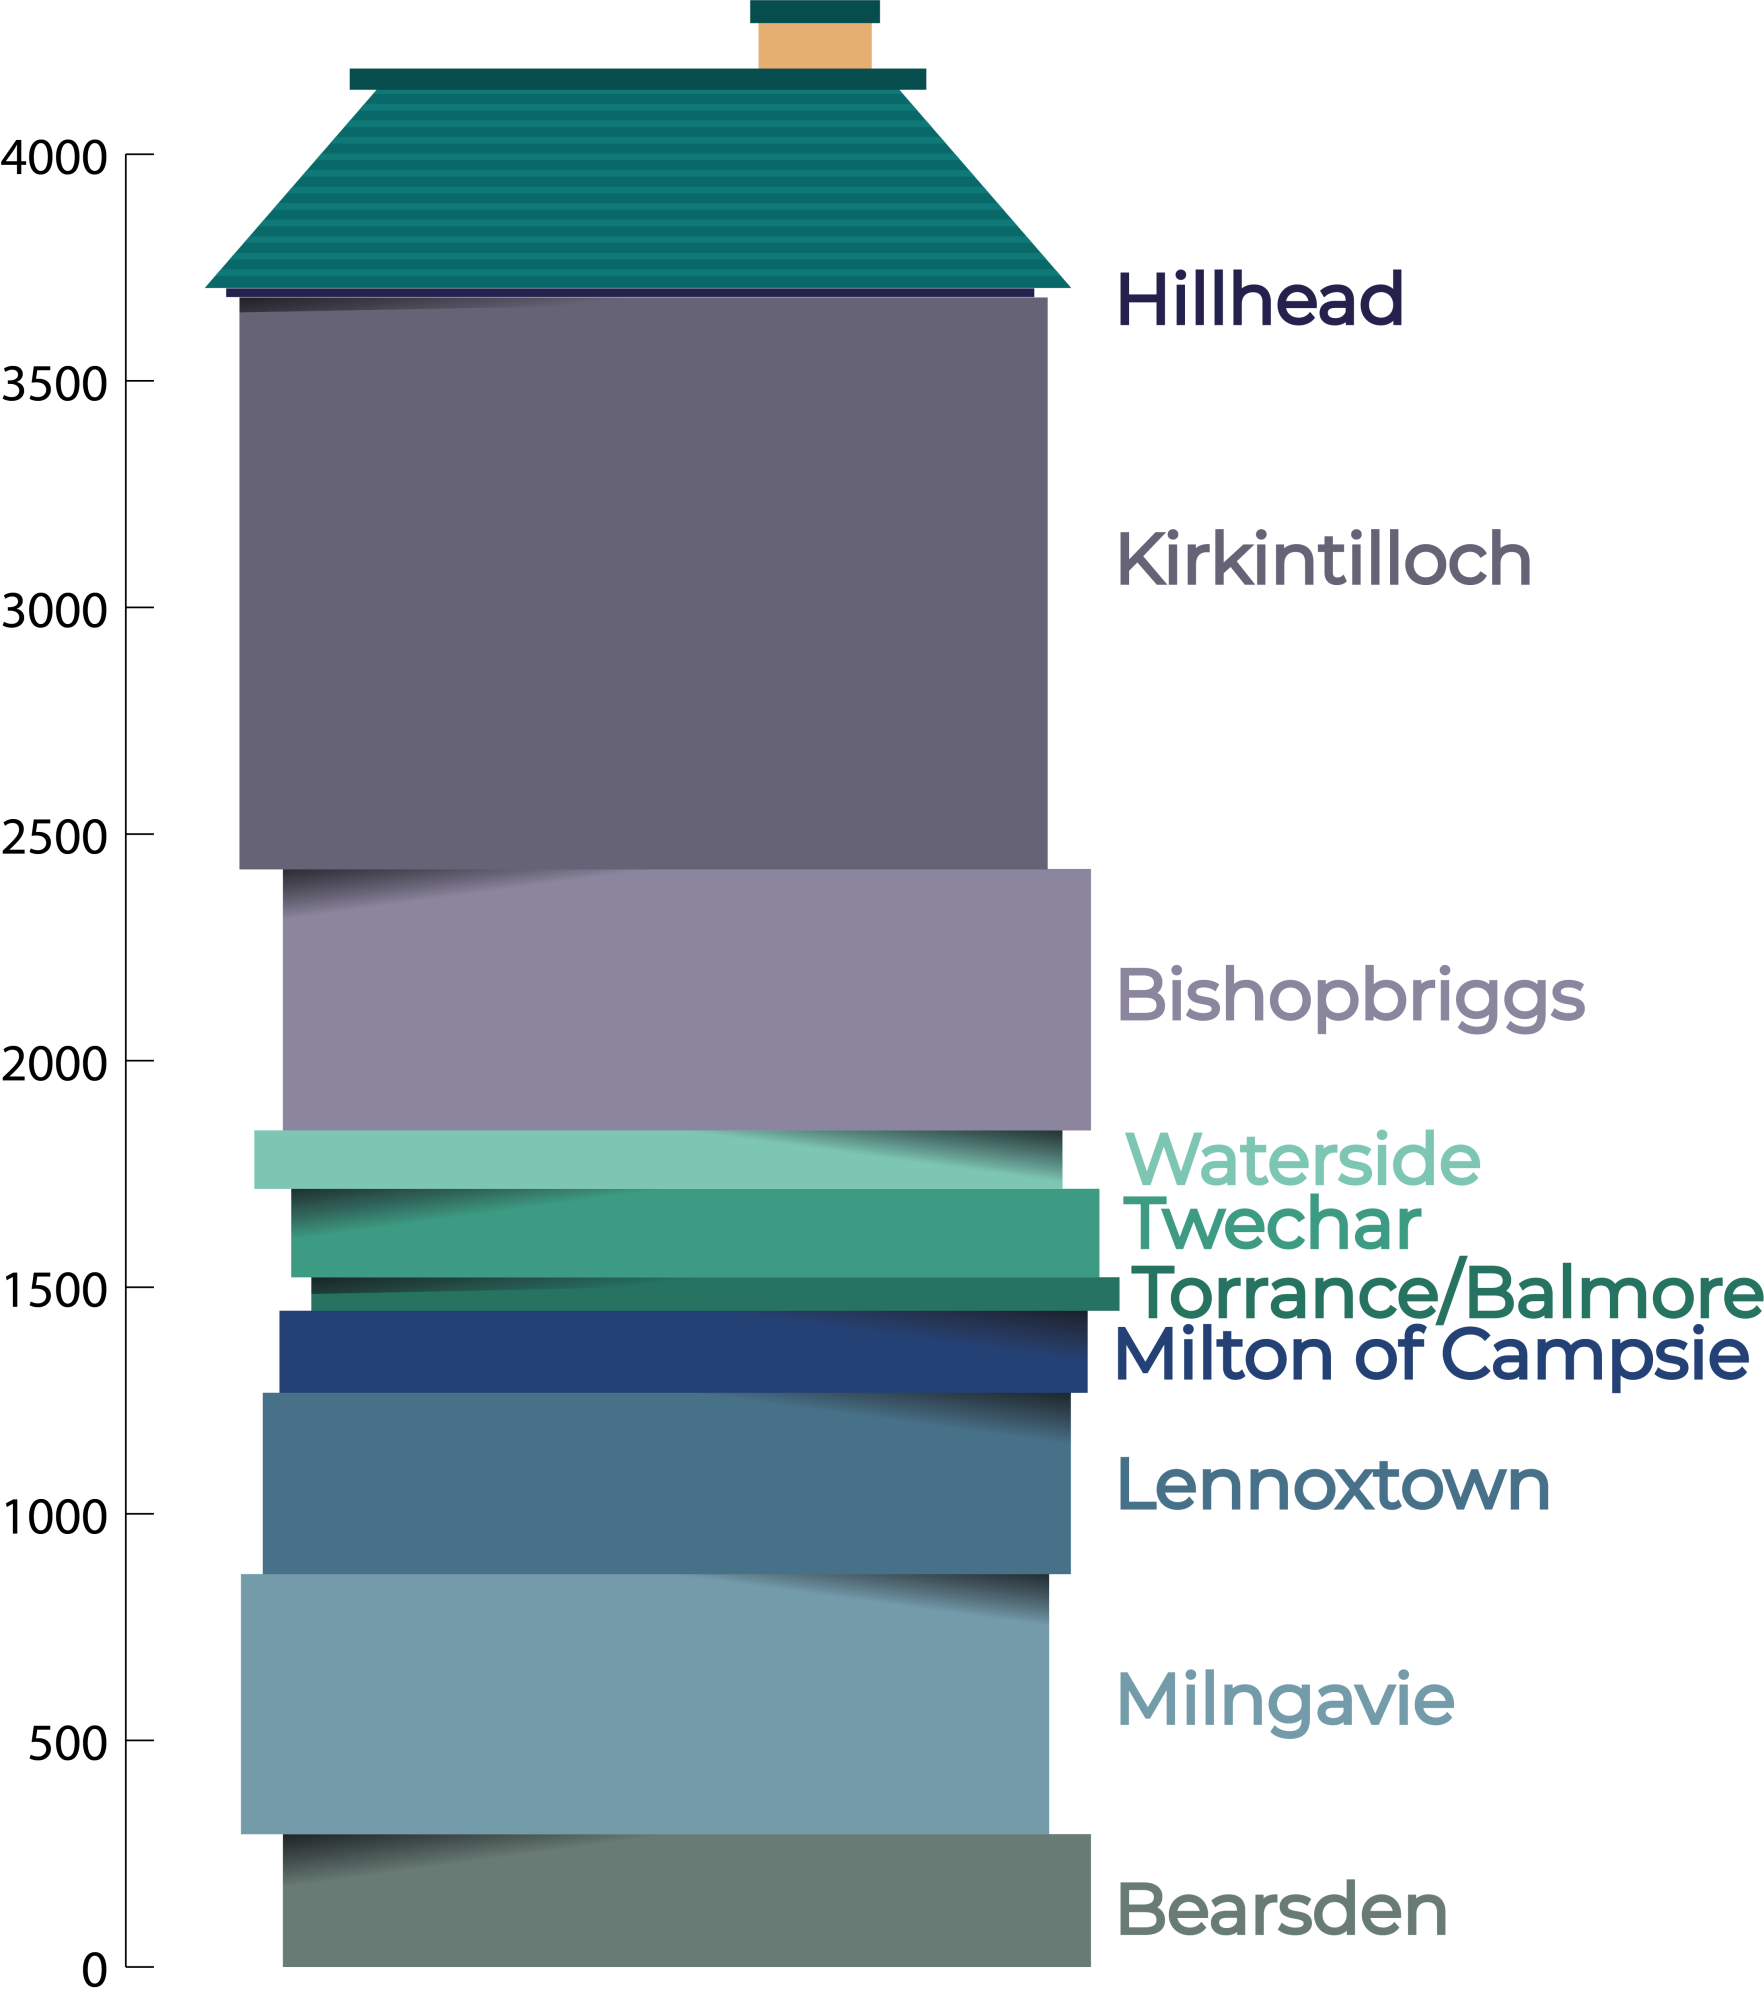 purple and green house graphic with names of the East Dunbartonshire areas next to it and numbers indicating how many houses each area has